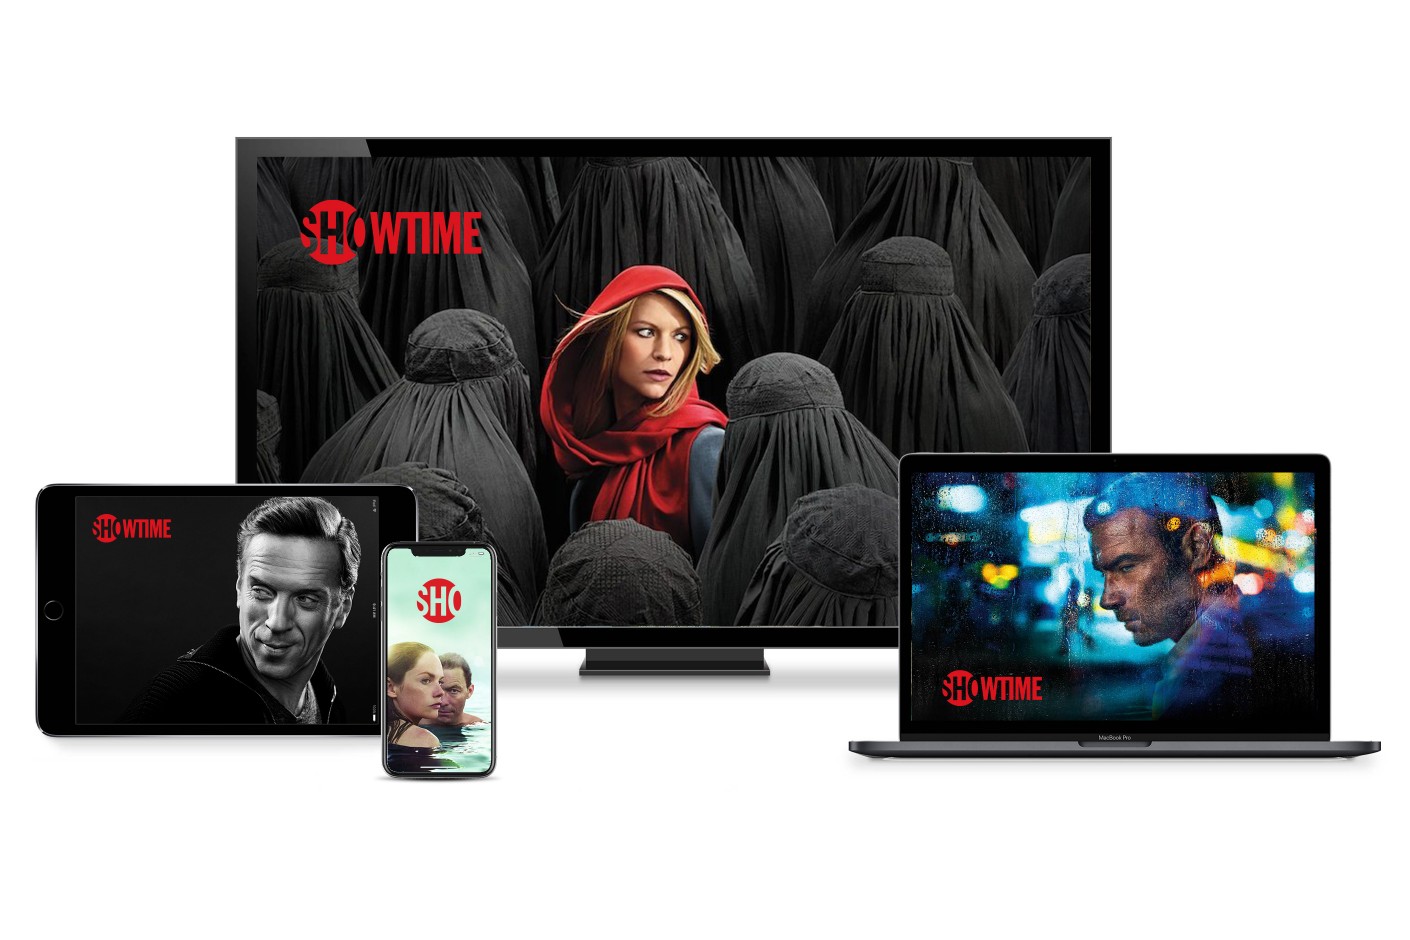 Showtime-w-Devices-1-2820x1880-2-1410x940